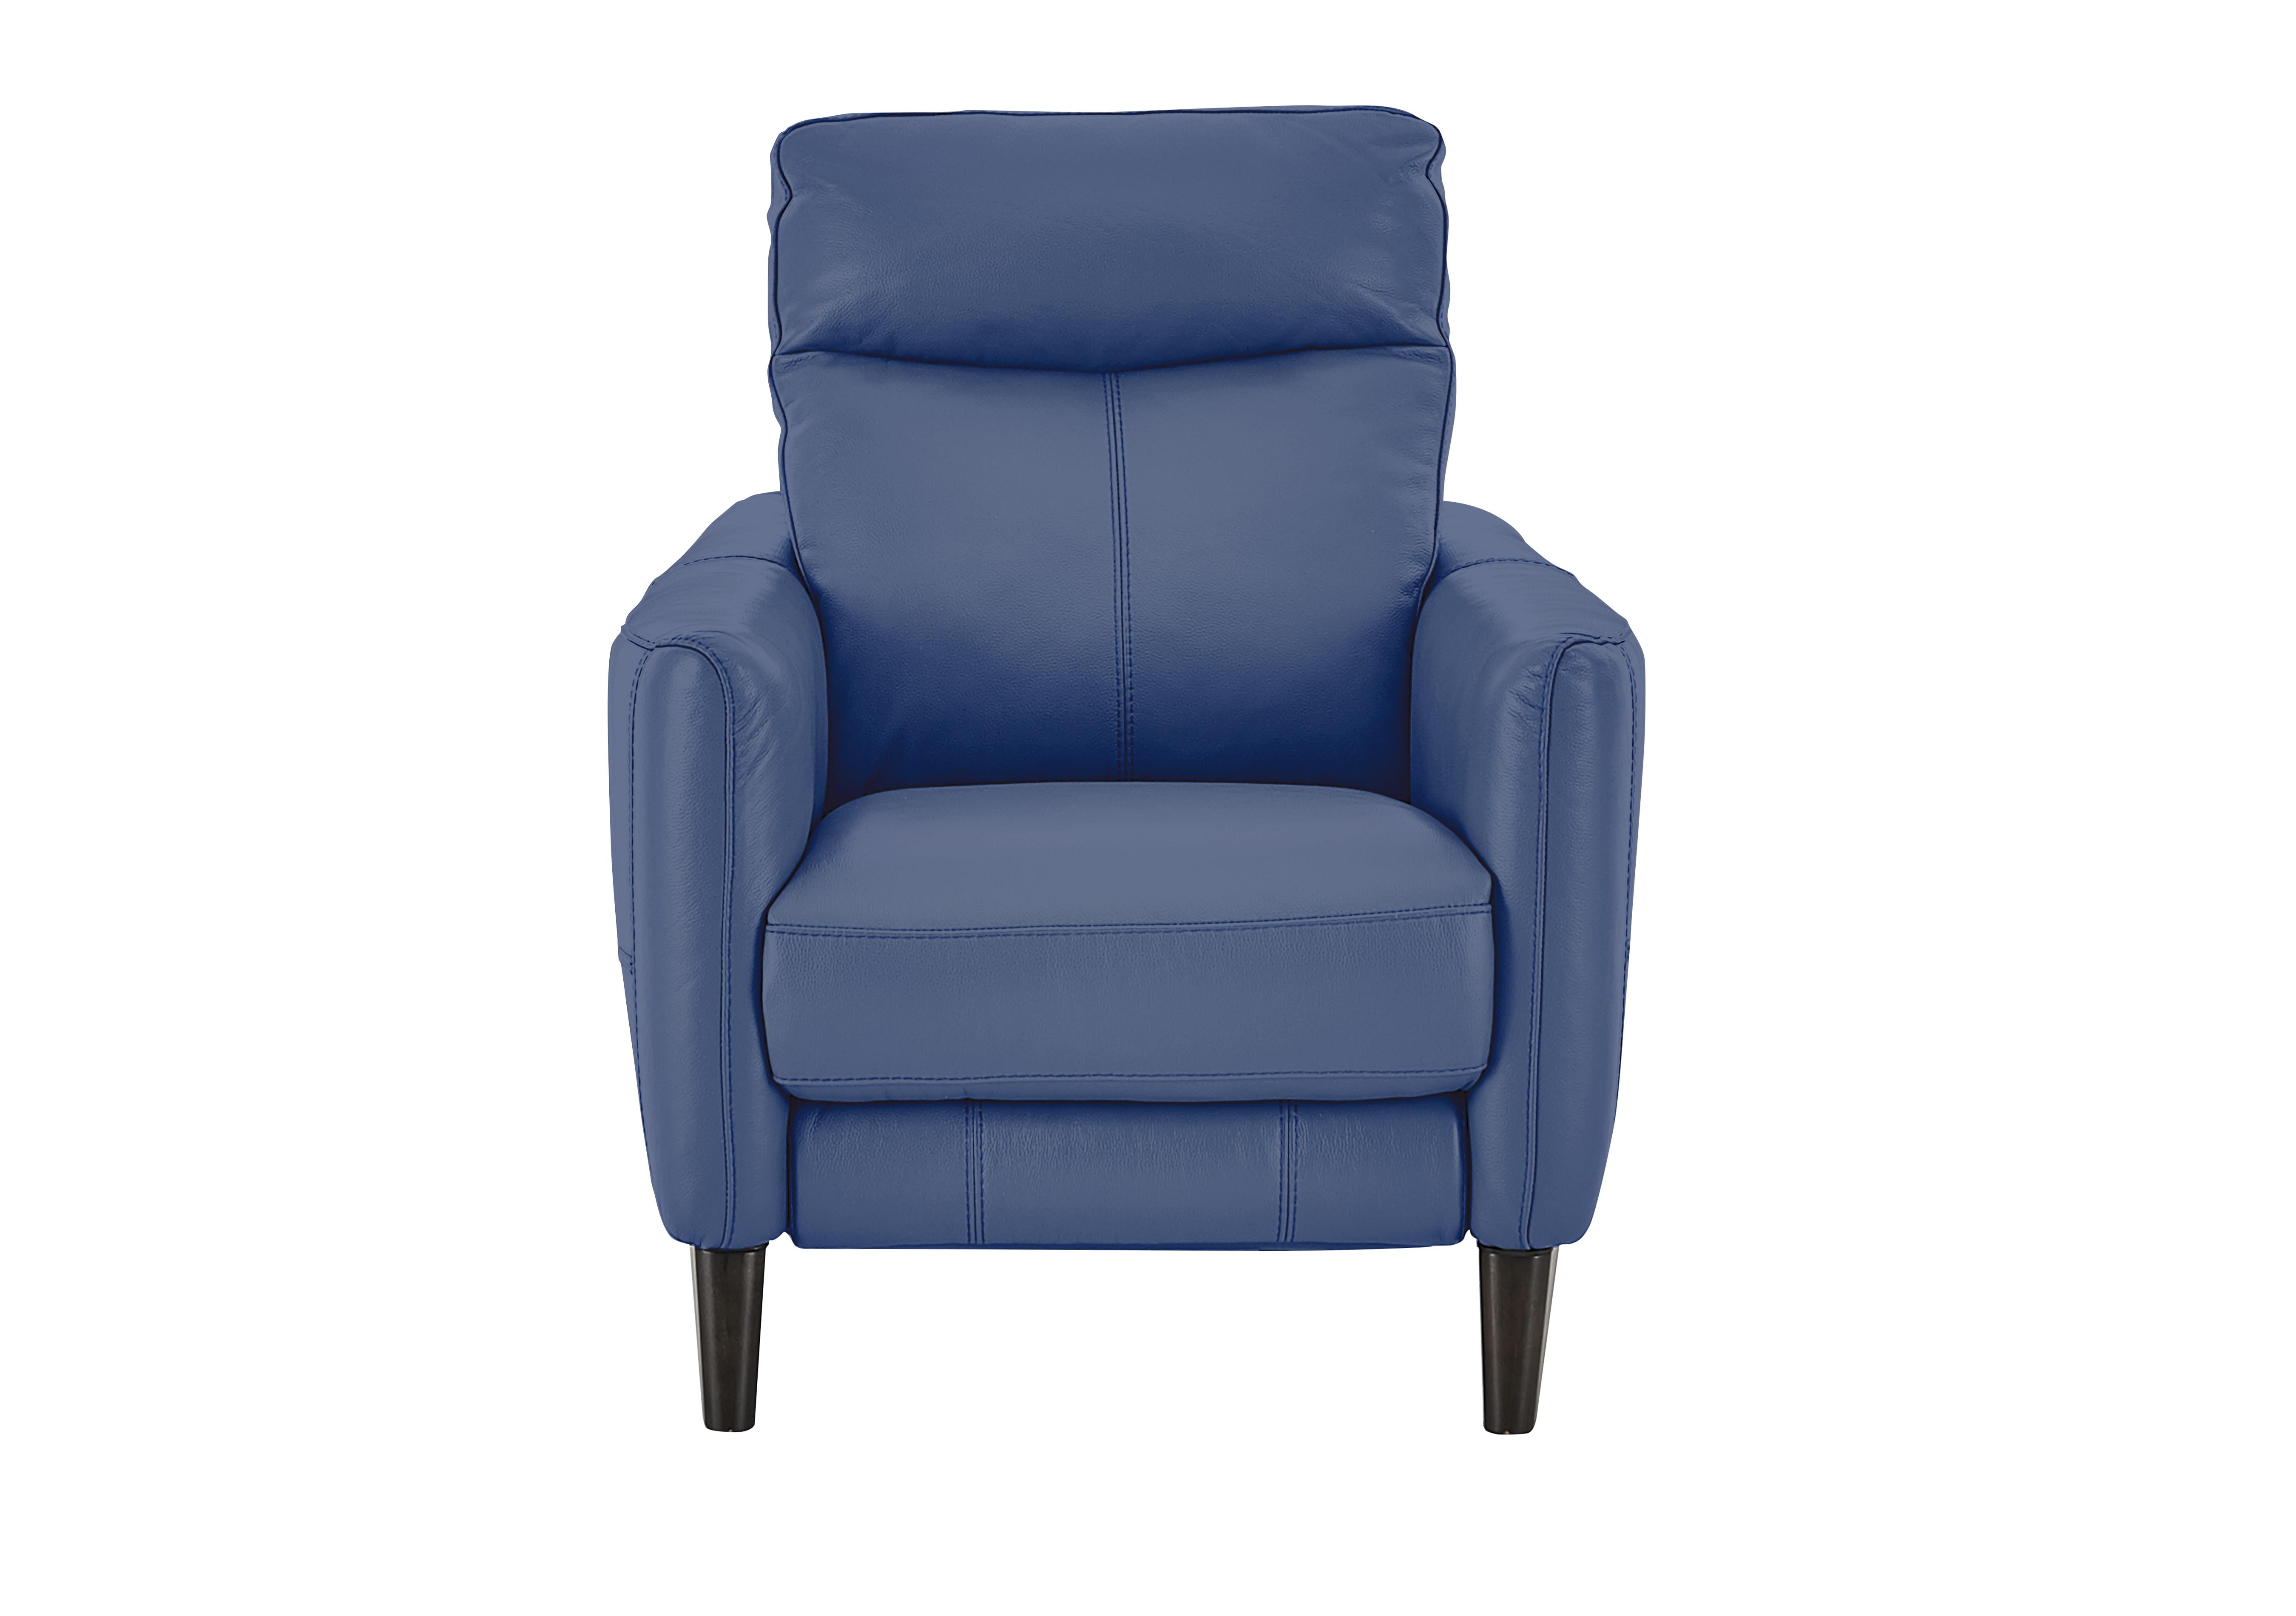 Compact Collection Petit Leather Recliner Armchair in Bv-313e Ocean Blue on Furniture Village